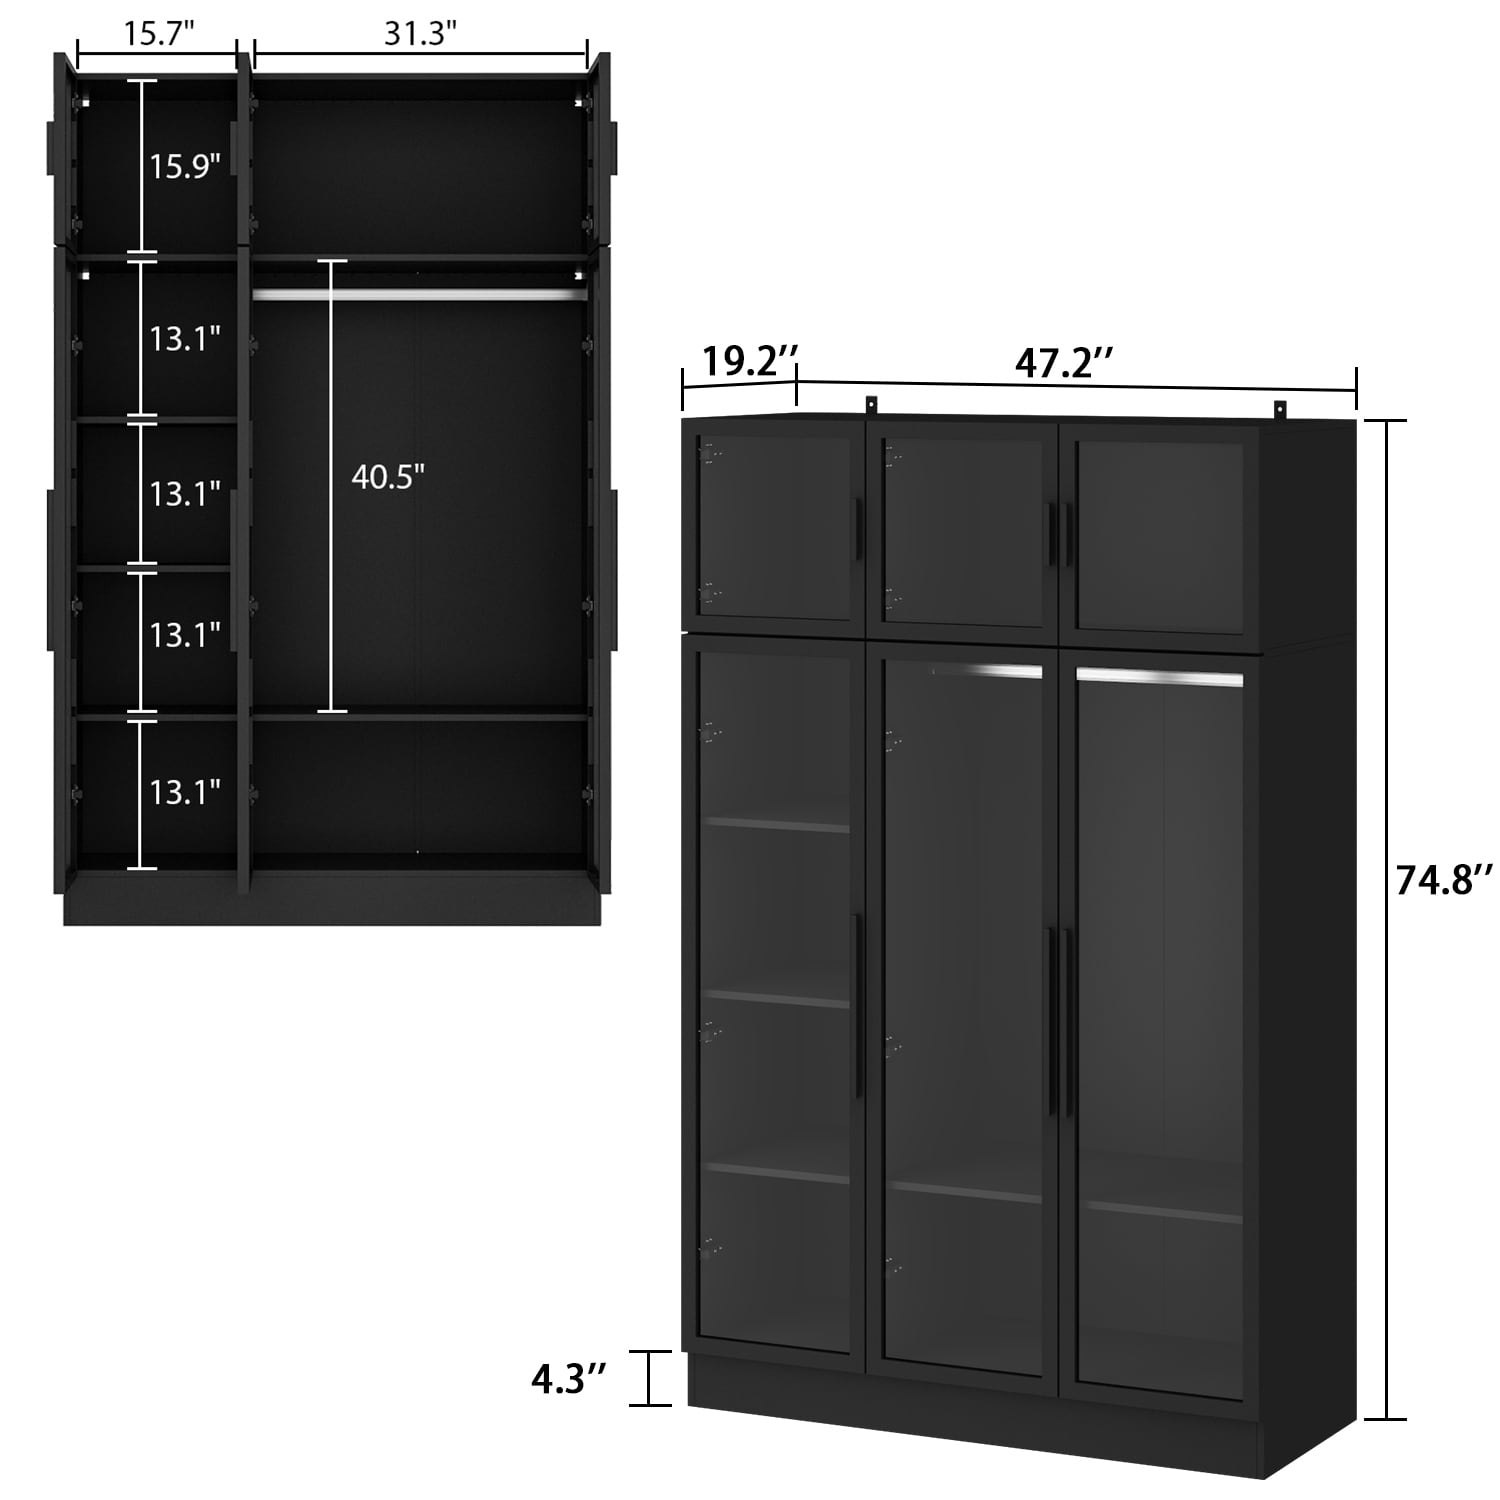 https://ak1.ostkcdn.com/images/products/is/images/direct/09224810221c9850c101c2af588af4a8ffb6956d/Three-Door-Armoire-LED-Light-All-Glass-Door-Closet-Cabinet-Wardrobe.jpg